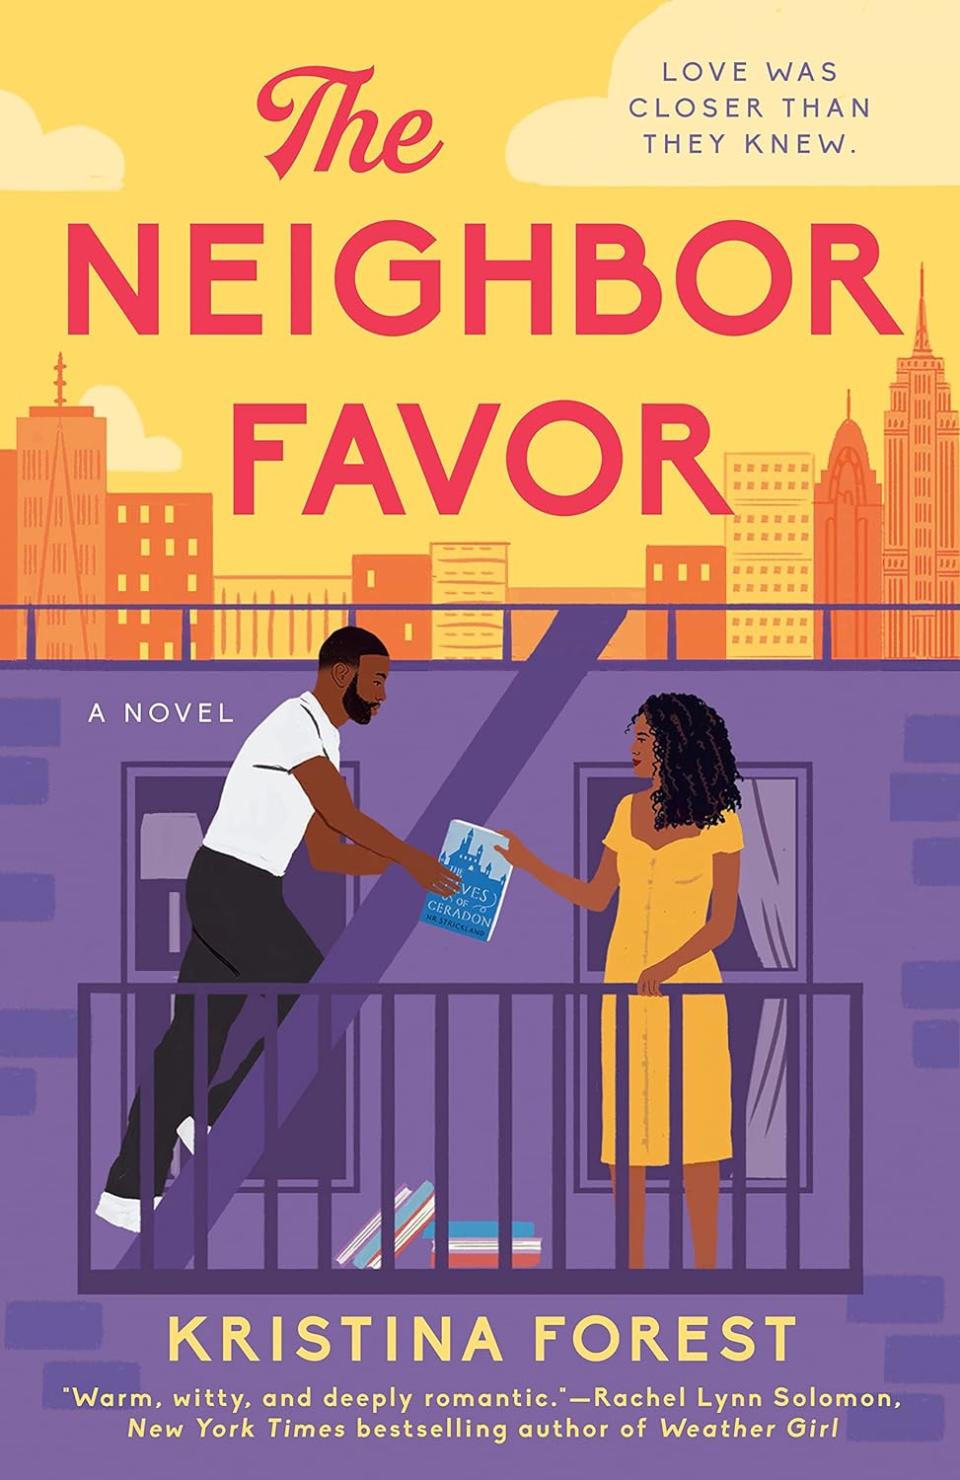 The Neighbor Favor by Kristina Forest (Romance books)